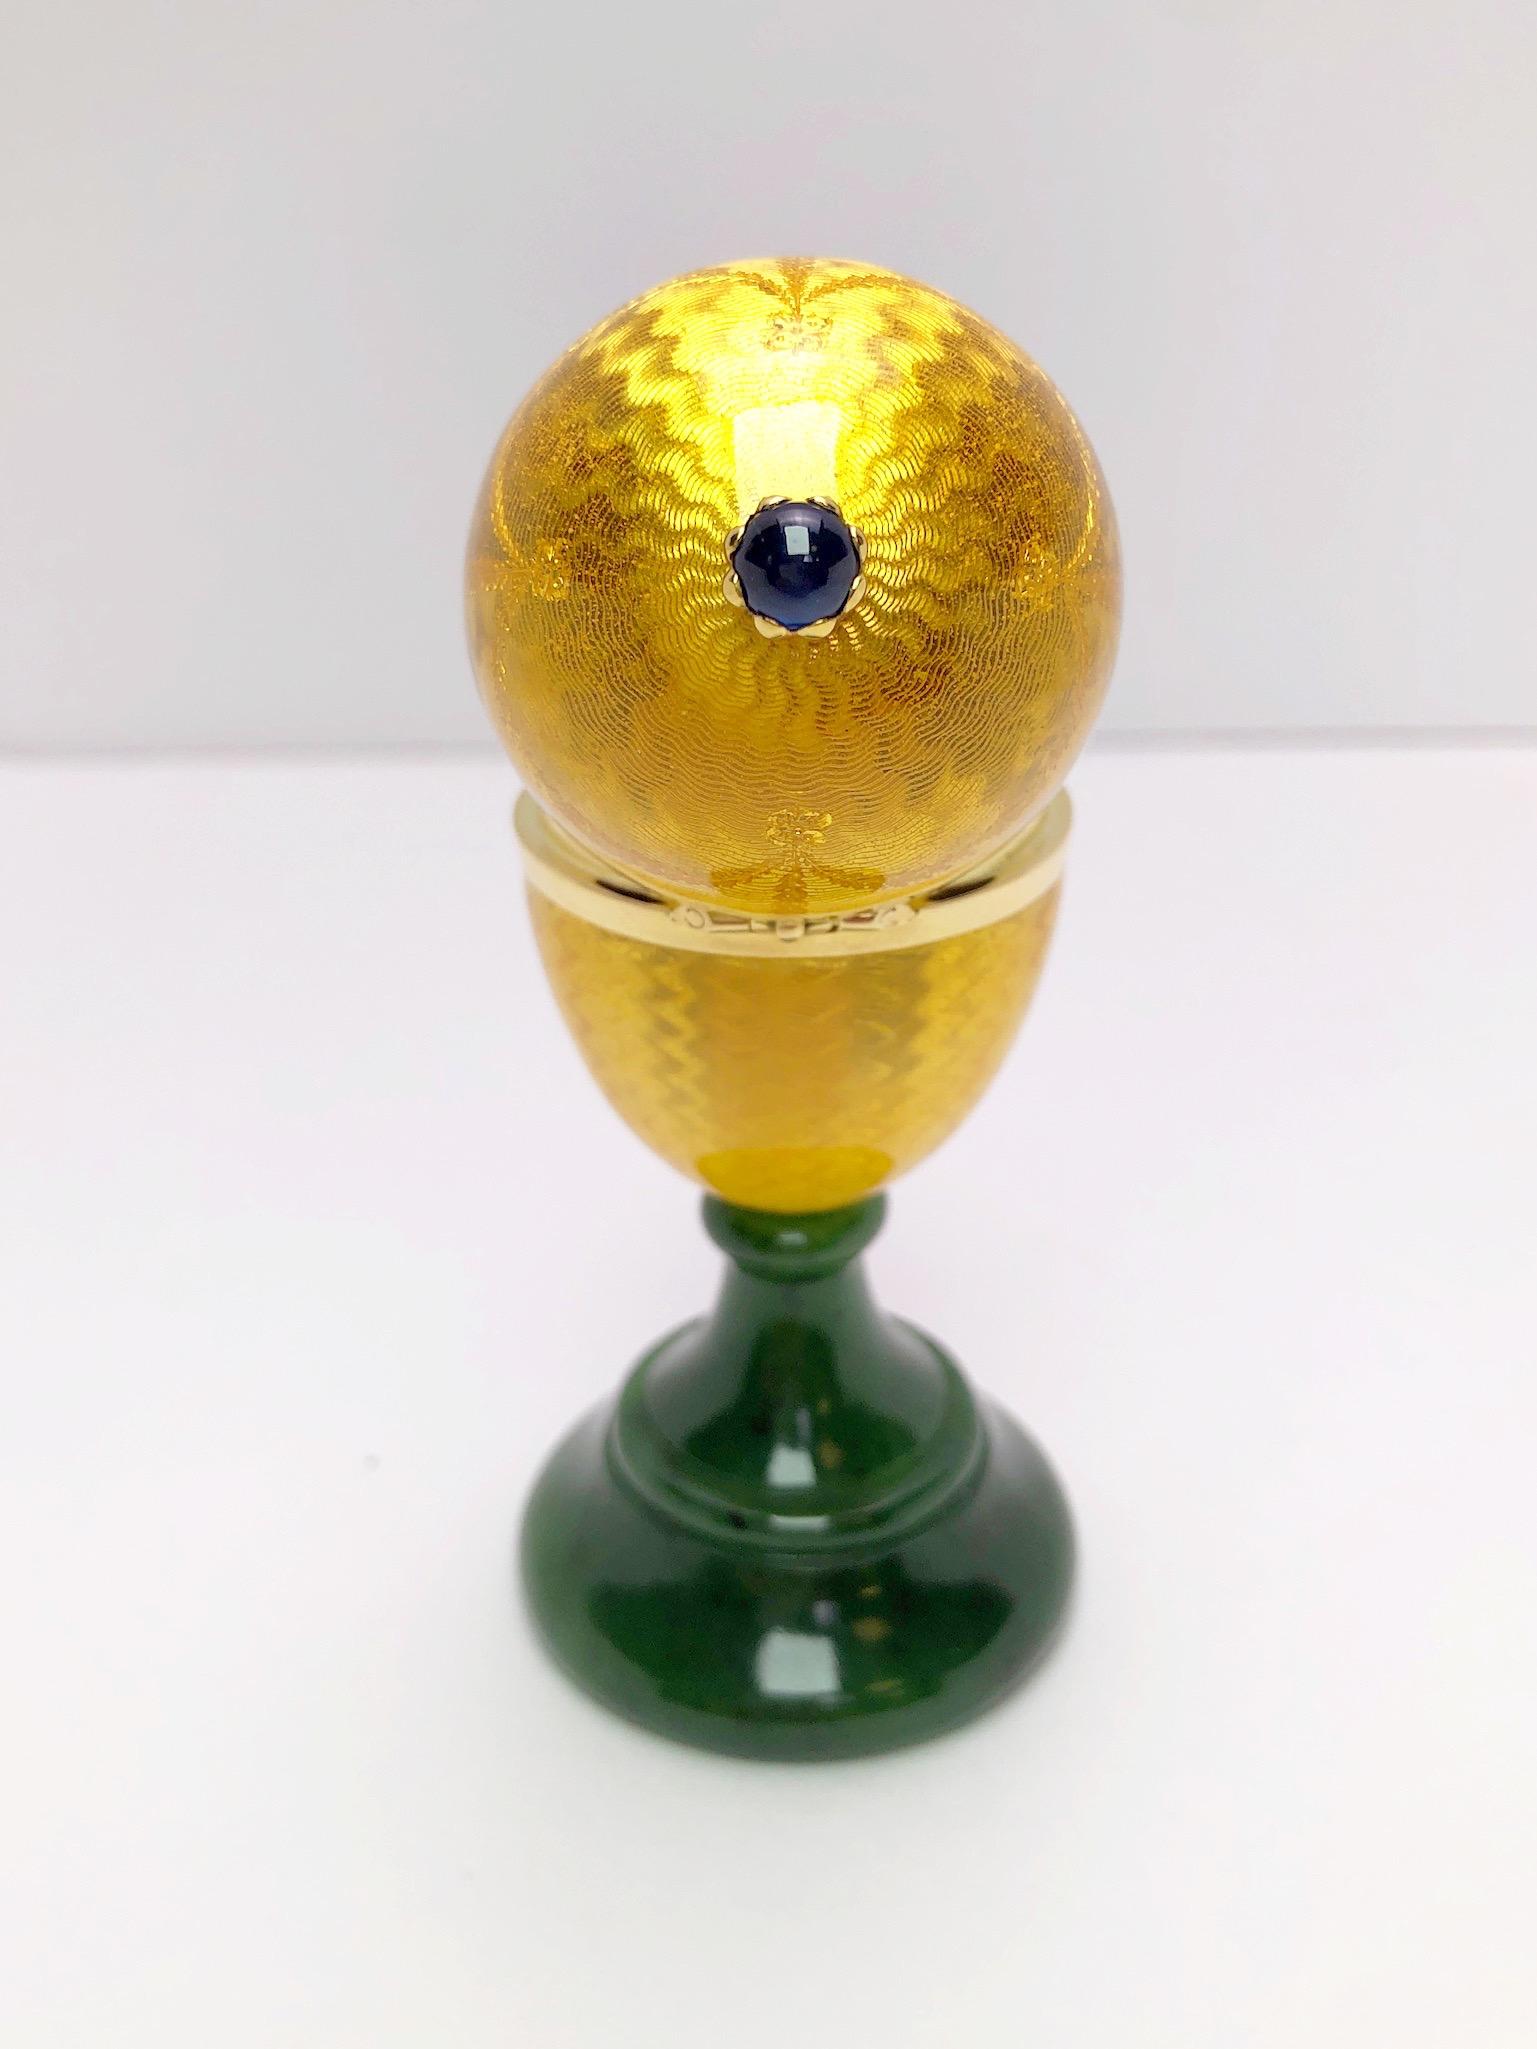 Cabochon Modern Faberge Enamel and Yellow Gold Ltd. Edition Surprise Egg with Chick